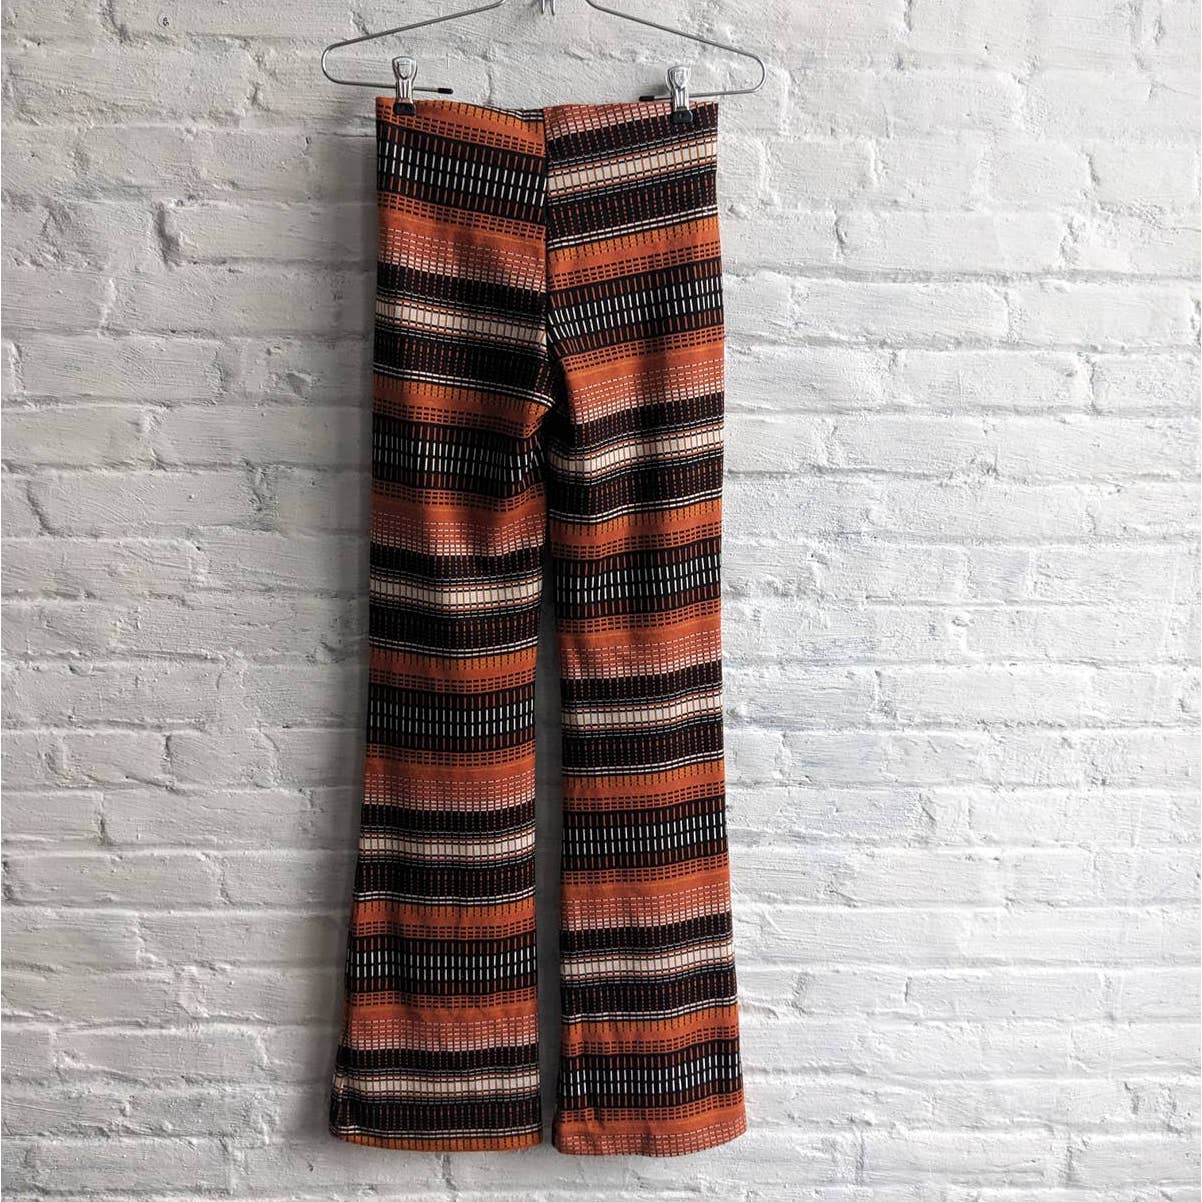 Urban Outfitters Retro Highwaist Flares Rust Earthtone Psychedelic Striped Pants